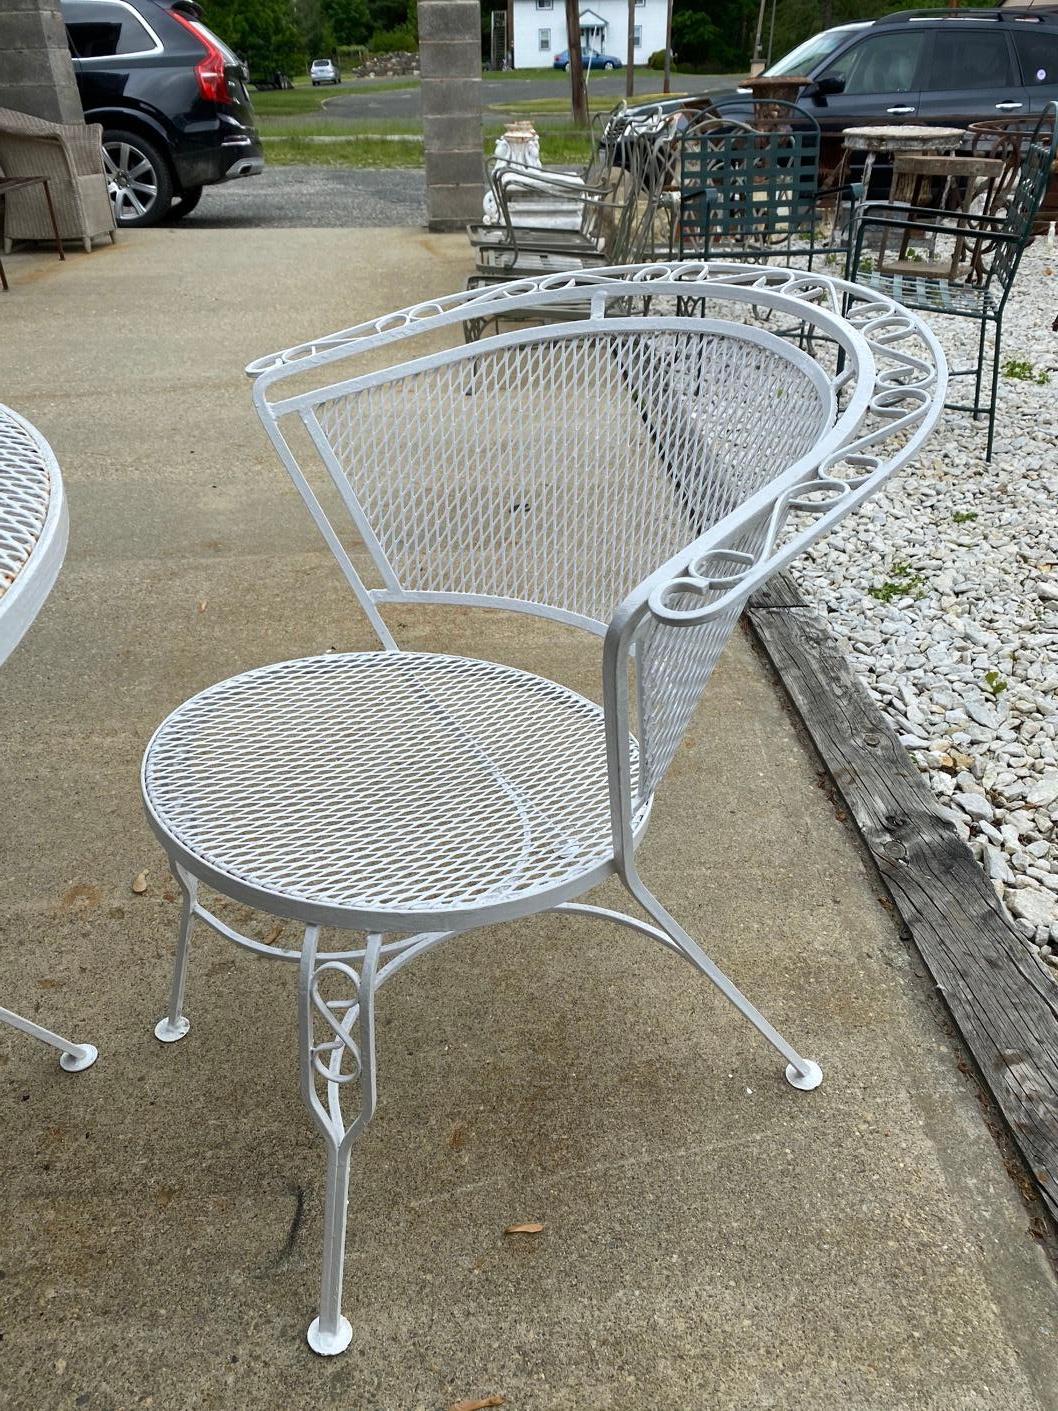 Three-piece outdoor dining set includes a dining table and two armchairs. The dining table features a Classic design with Classic diamond mesh wire top with a center hole for an umbrella. The armchairs are very comfortable with a curved barrel back